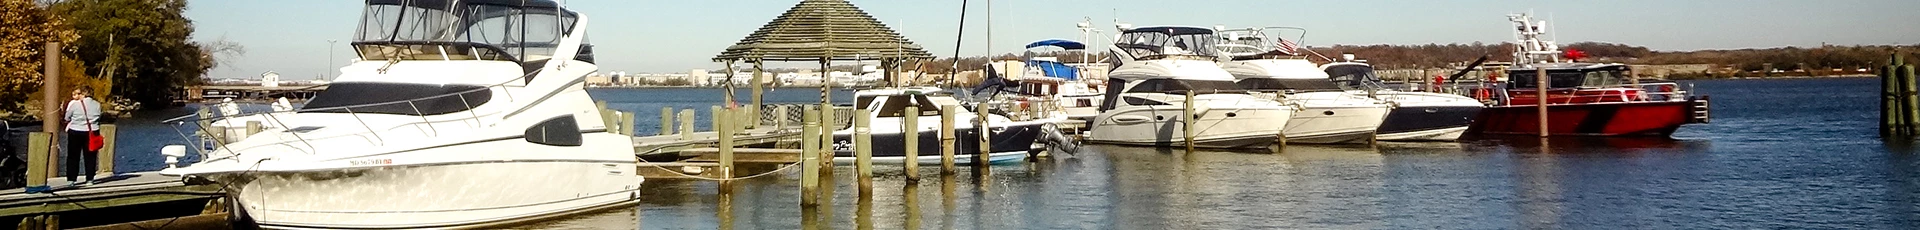 Boat Removal, Dismantle and Disposal in Lawtey Florida